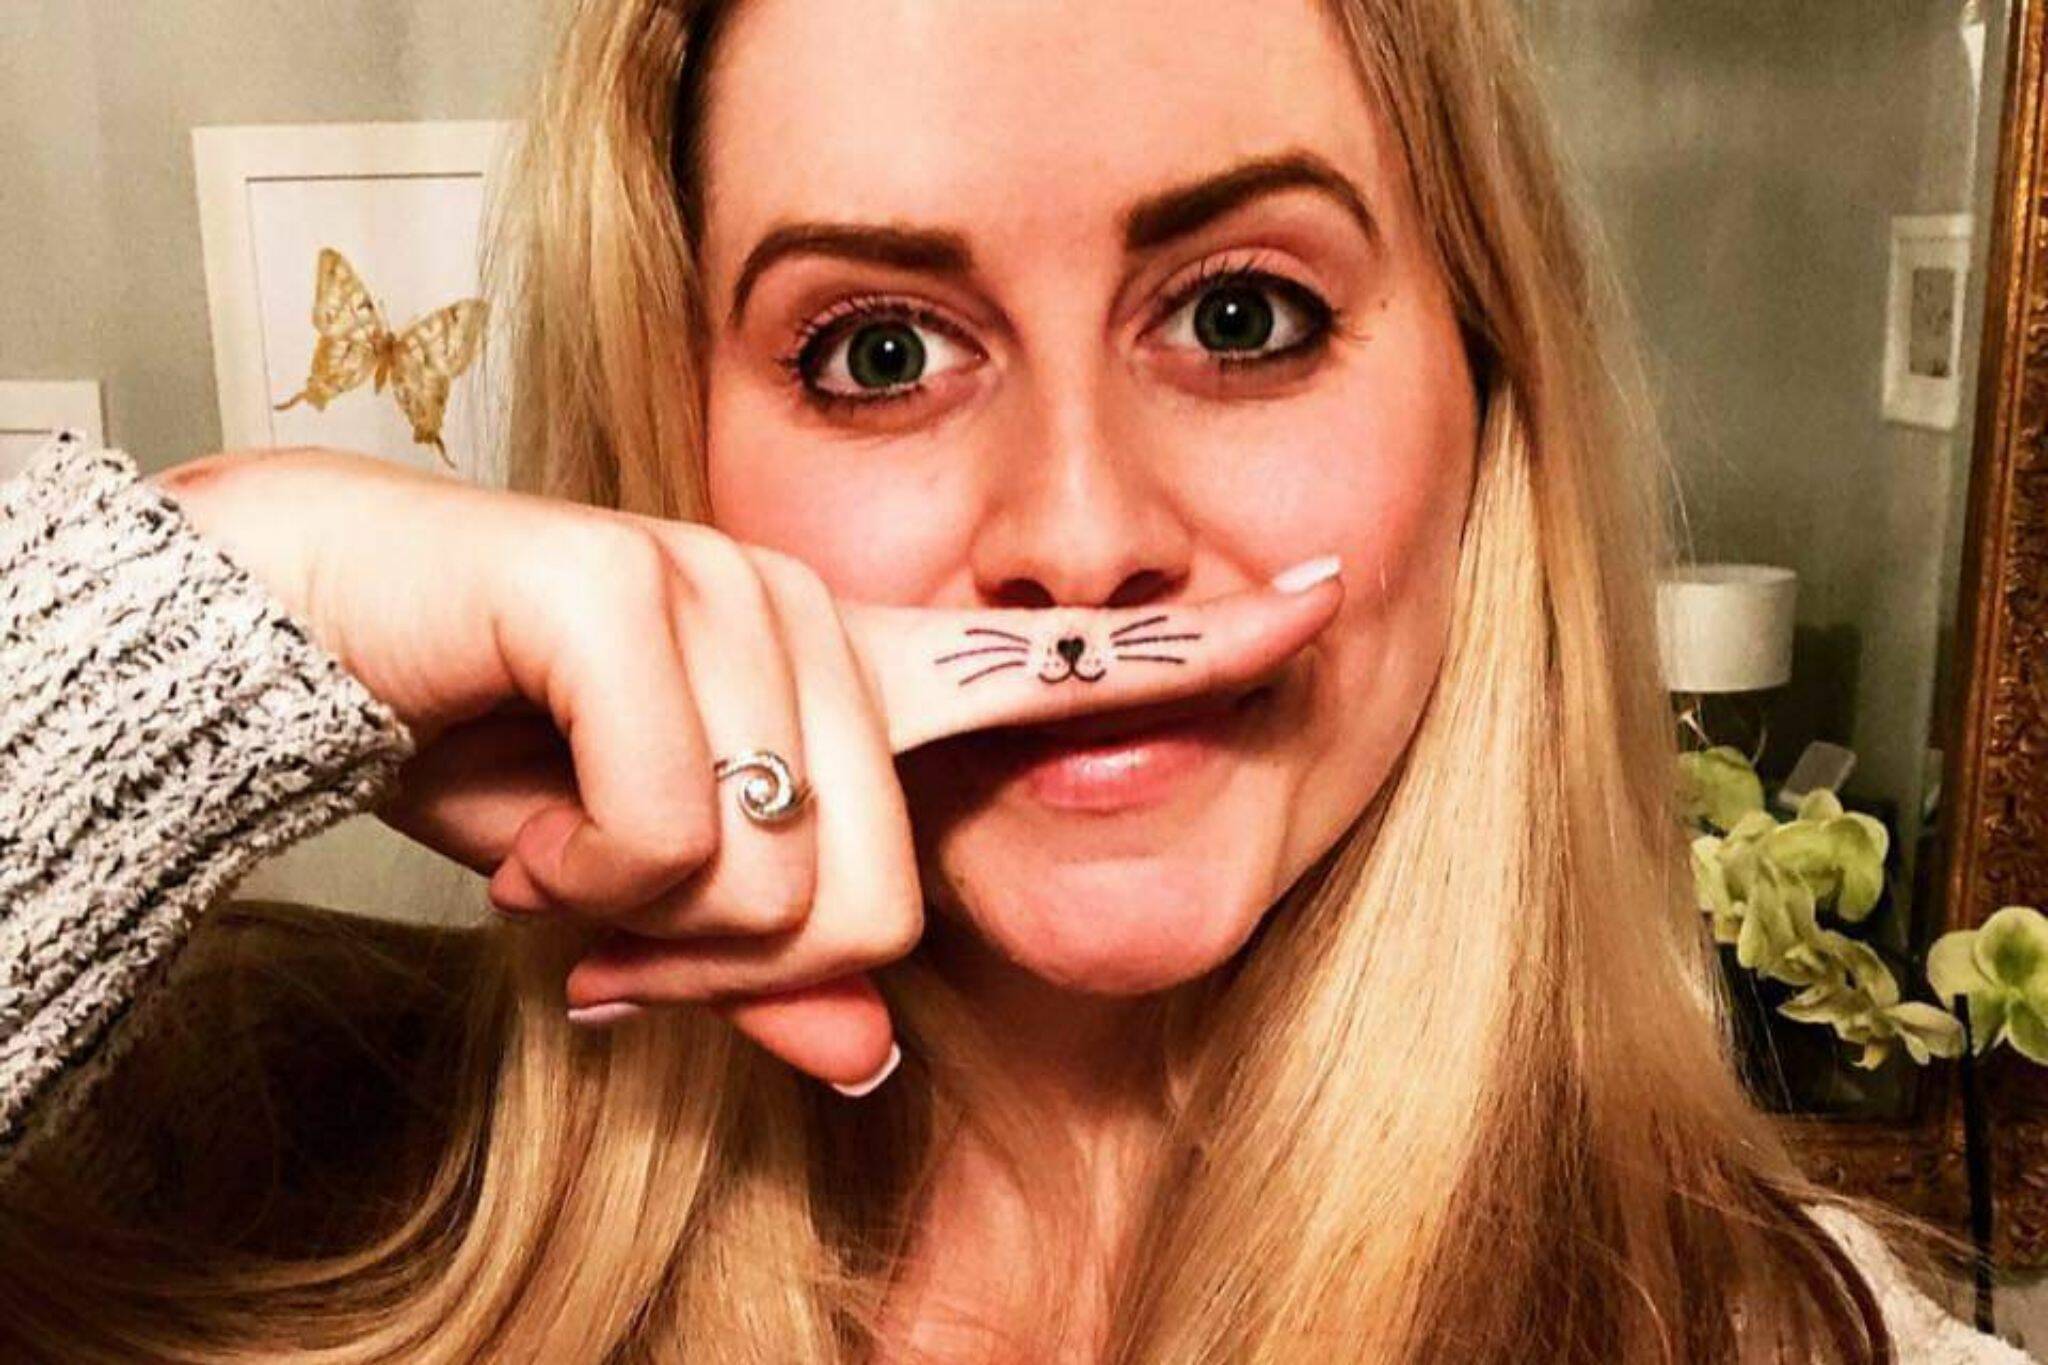 Ashley Morrison with a whisker tattoo on her finger. Her life centered around cat rescue, foster, adoption and spreading happiness through mini lions. (Photo provided by Cindi Morrison)